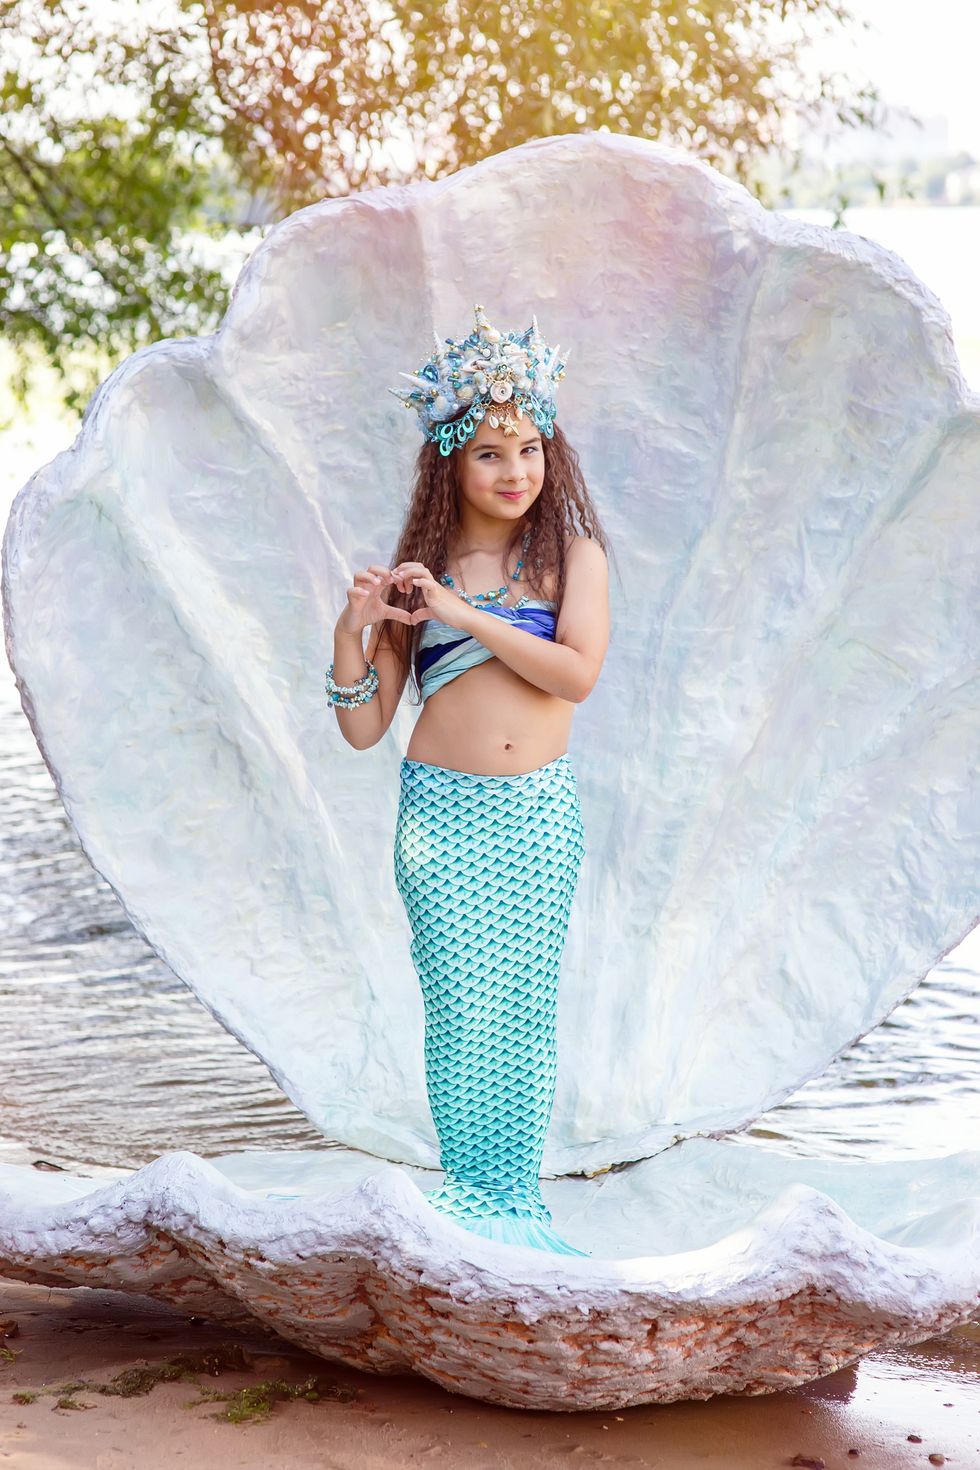 Great idea for Mermaid Costume! Buy cheap green pants and paint